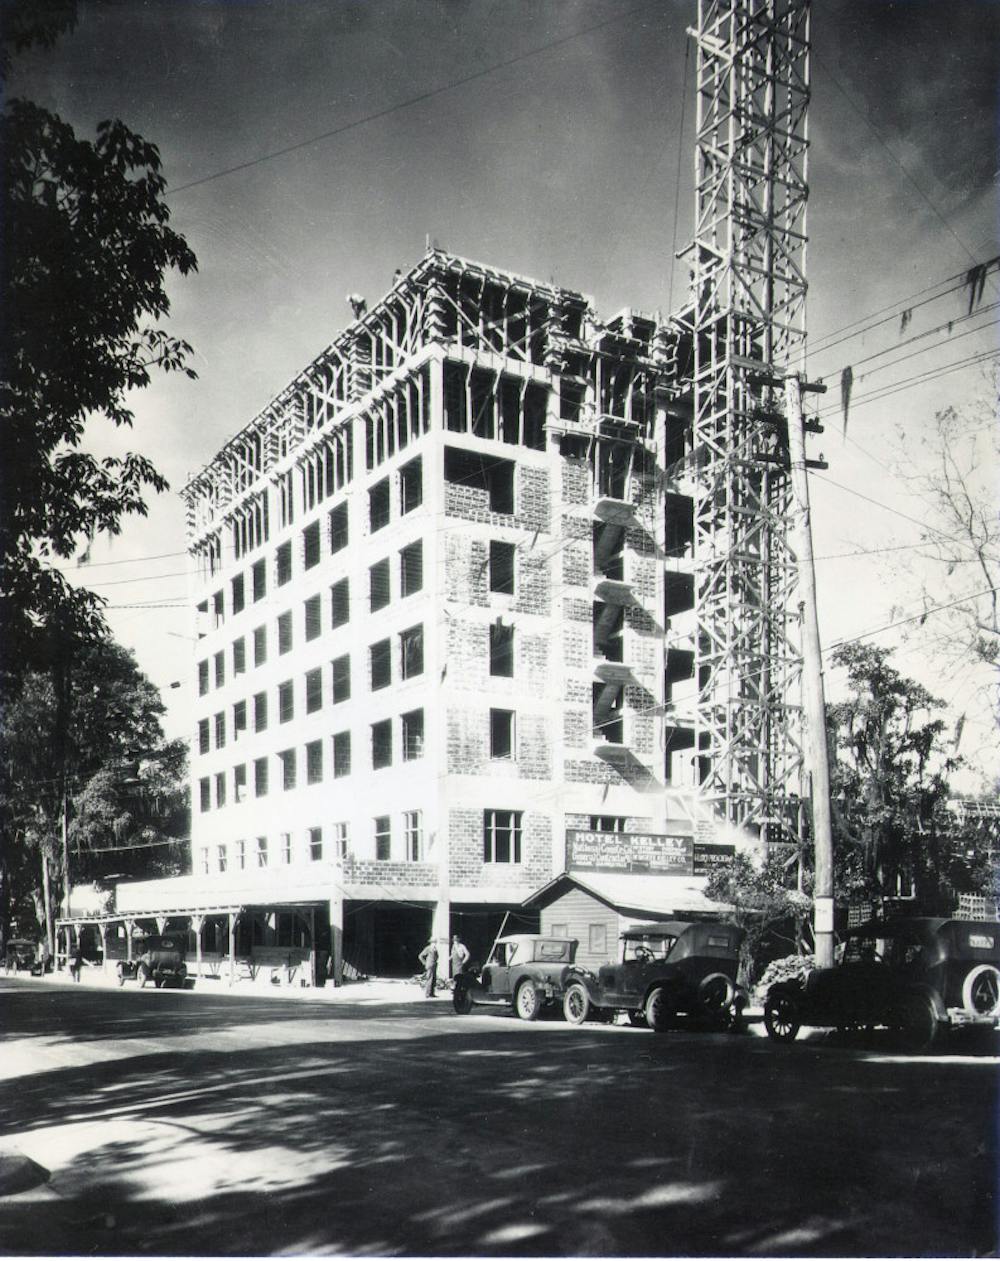 <p><span>The Seagle Building was built in the 1920s, but construction was resumed in 1936 after delays caused by the Great Depression. It never served as a hotel, despite being built for this purpose.</span></p>